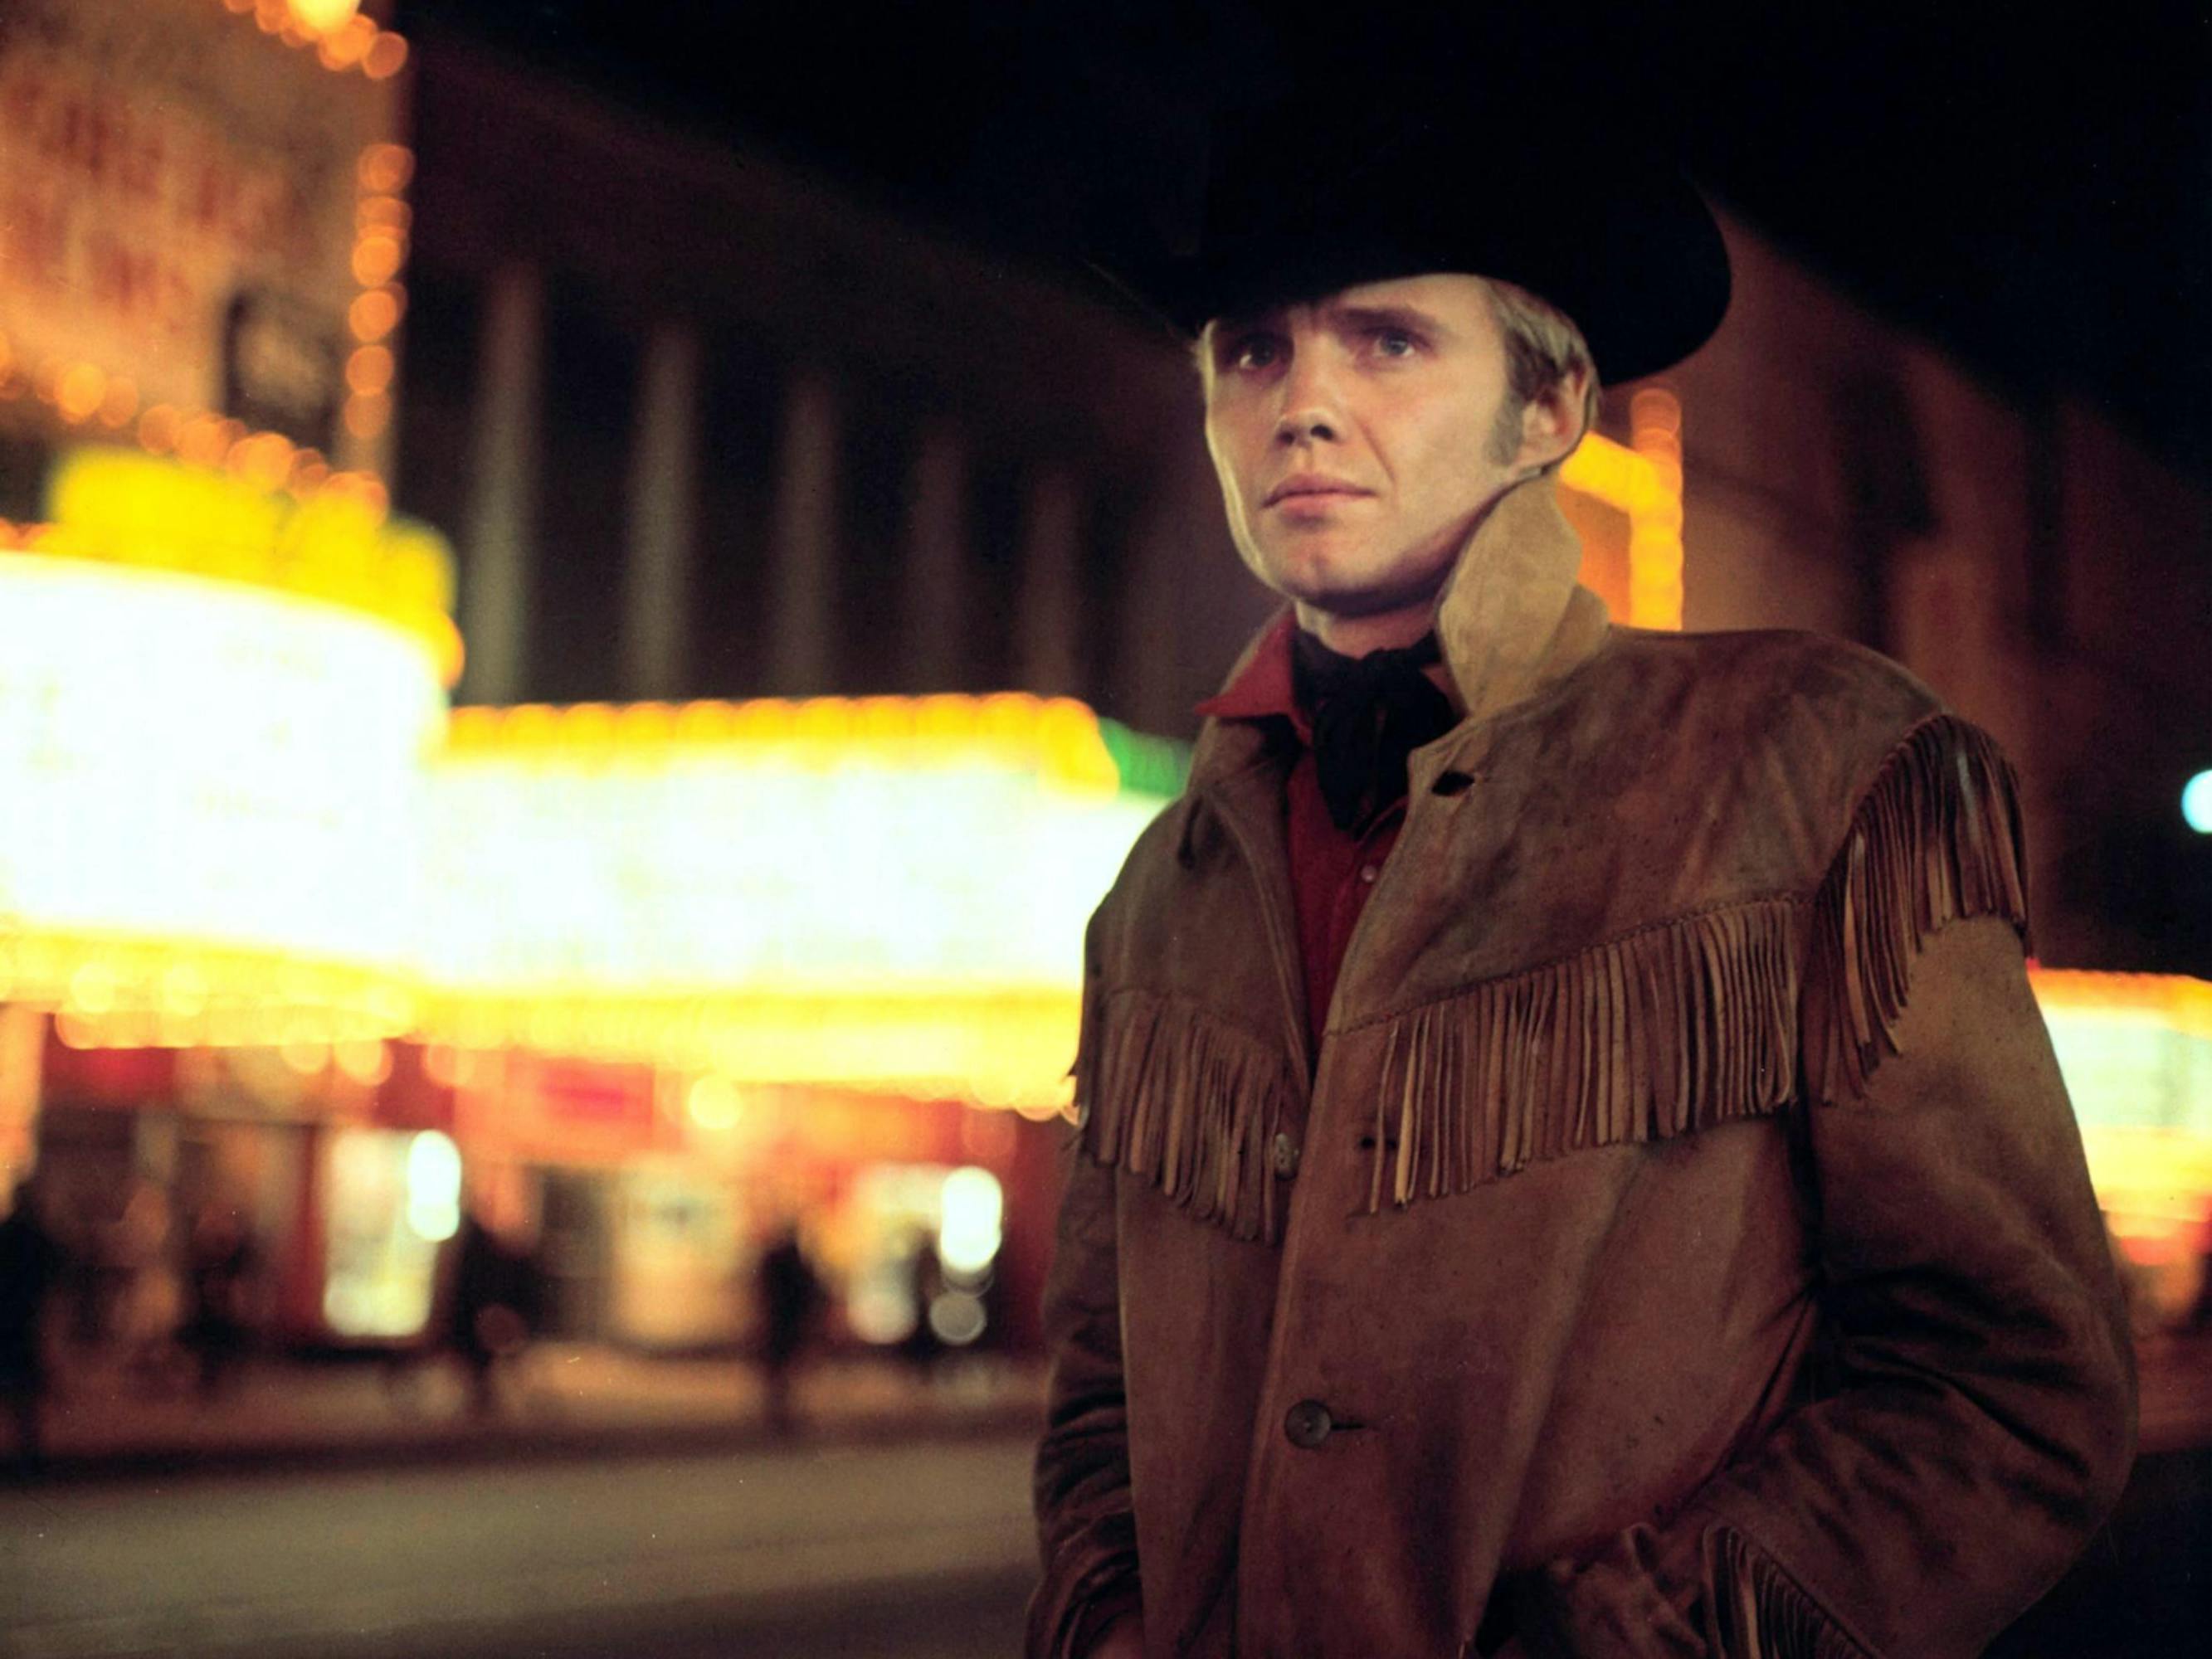 Jon Voight stands in his cowboy hat and jacket, with glowing neon lights blurred behind him.